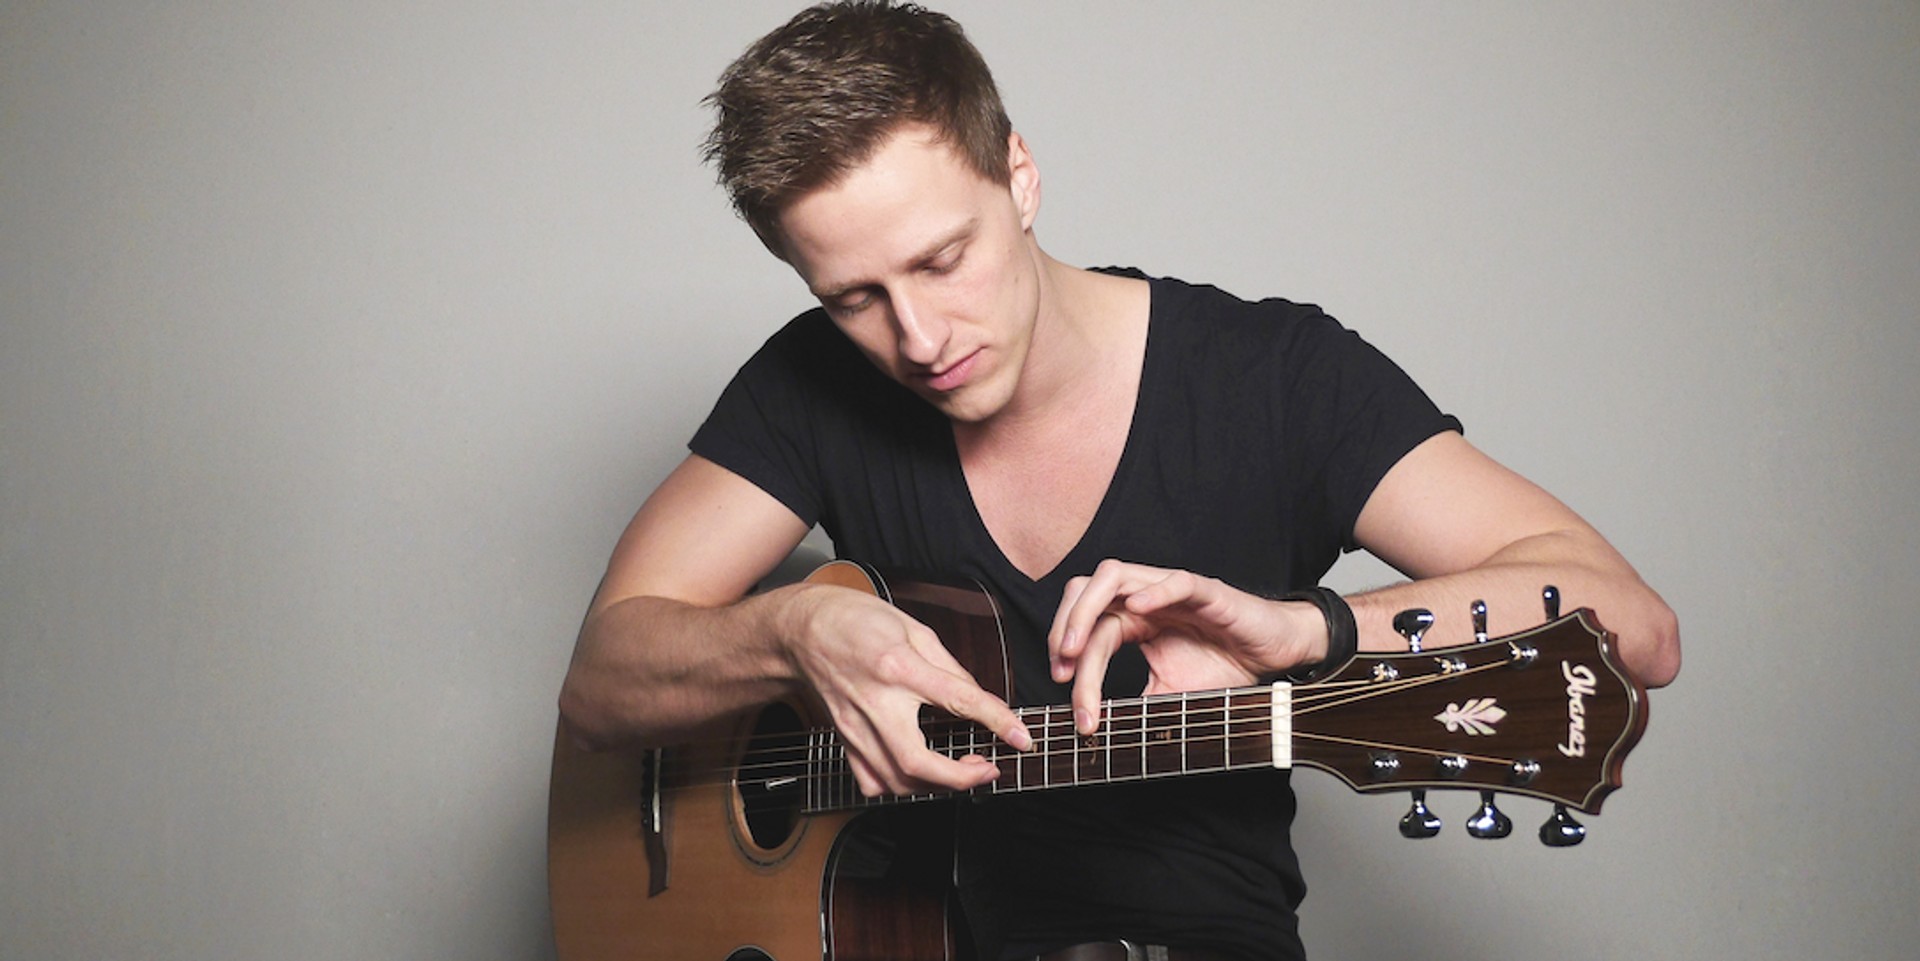 German fingerstyle guitarist Tobias Rauscher to host acoustic guitar masterclass in Singapore